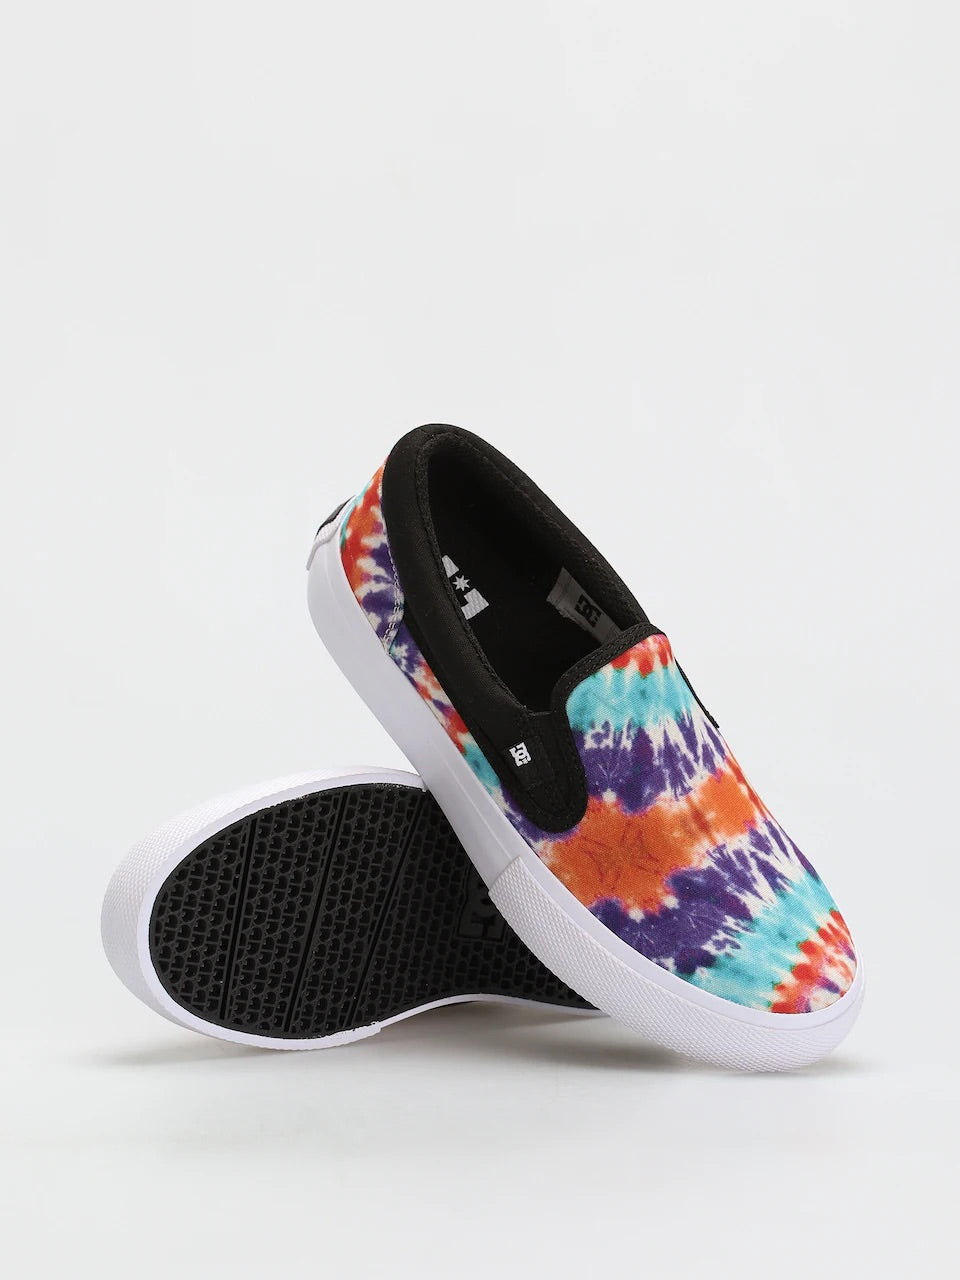 DC MANUAL SLIP ON YOUTH SHOE PRIMARY TIE DYE